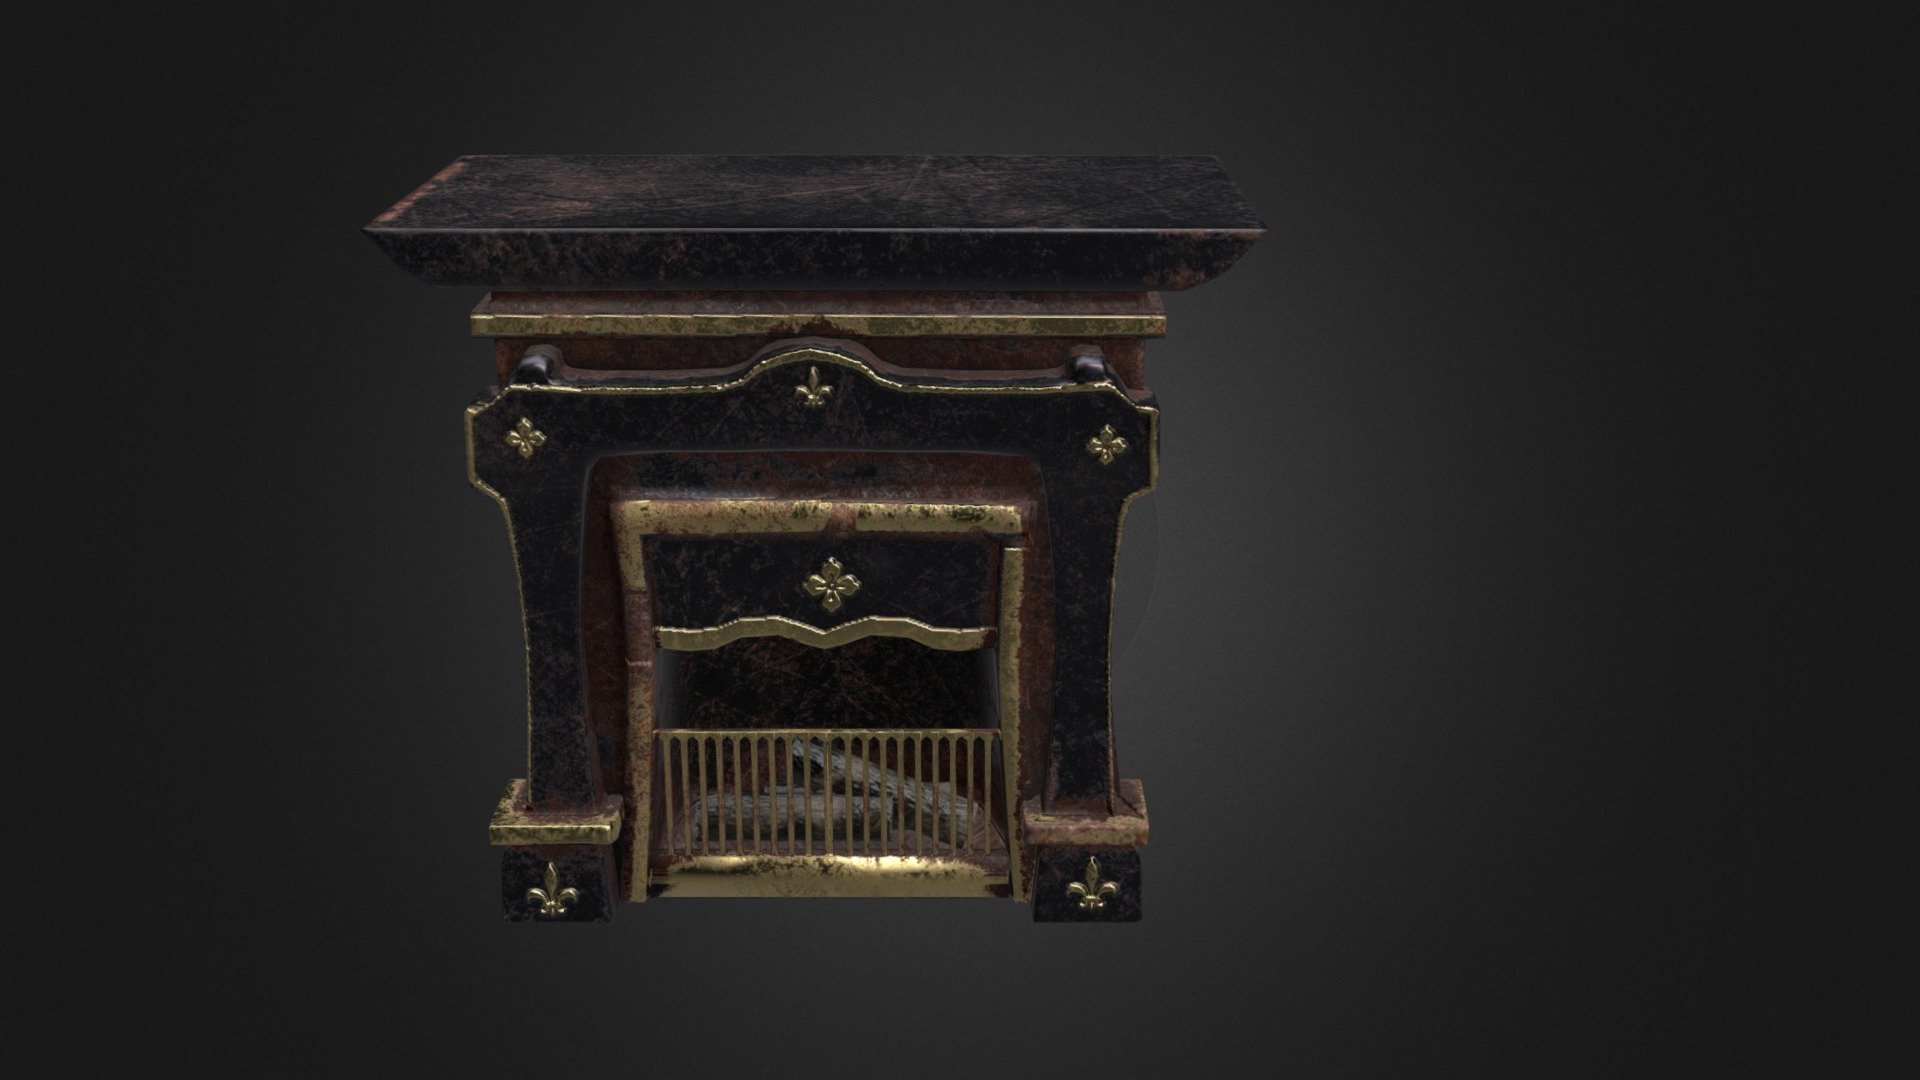 A fireplace asset created for Expresso Games' Bad Manors! - Old Victorian Fireplace - 3D model by 3d artist (@SynthGhost) 3d model